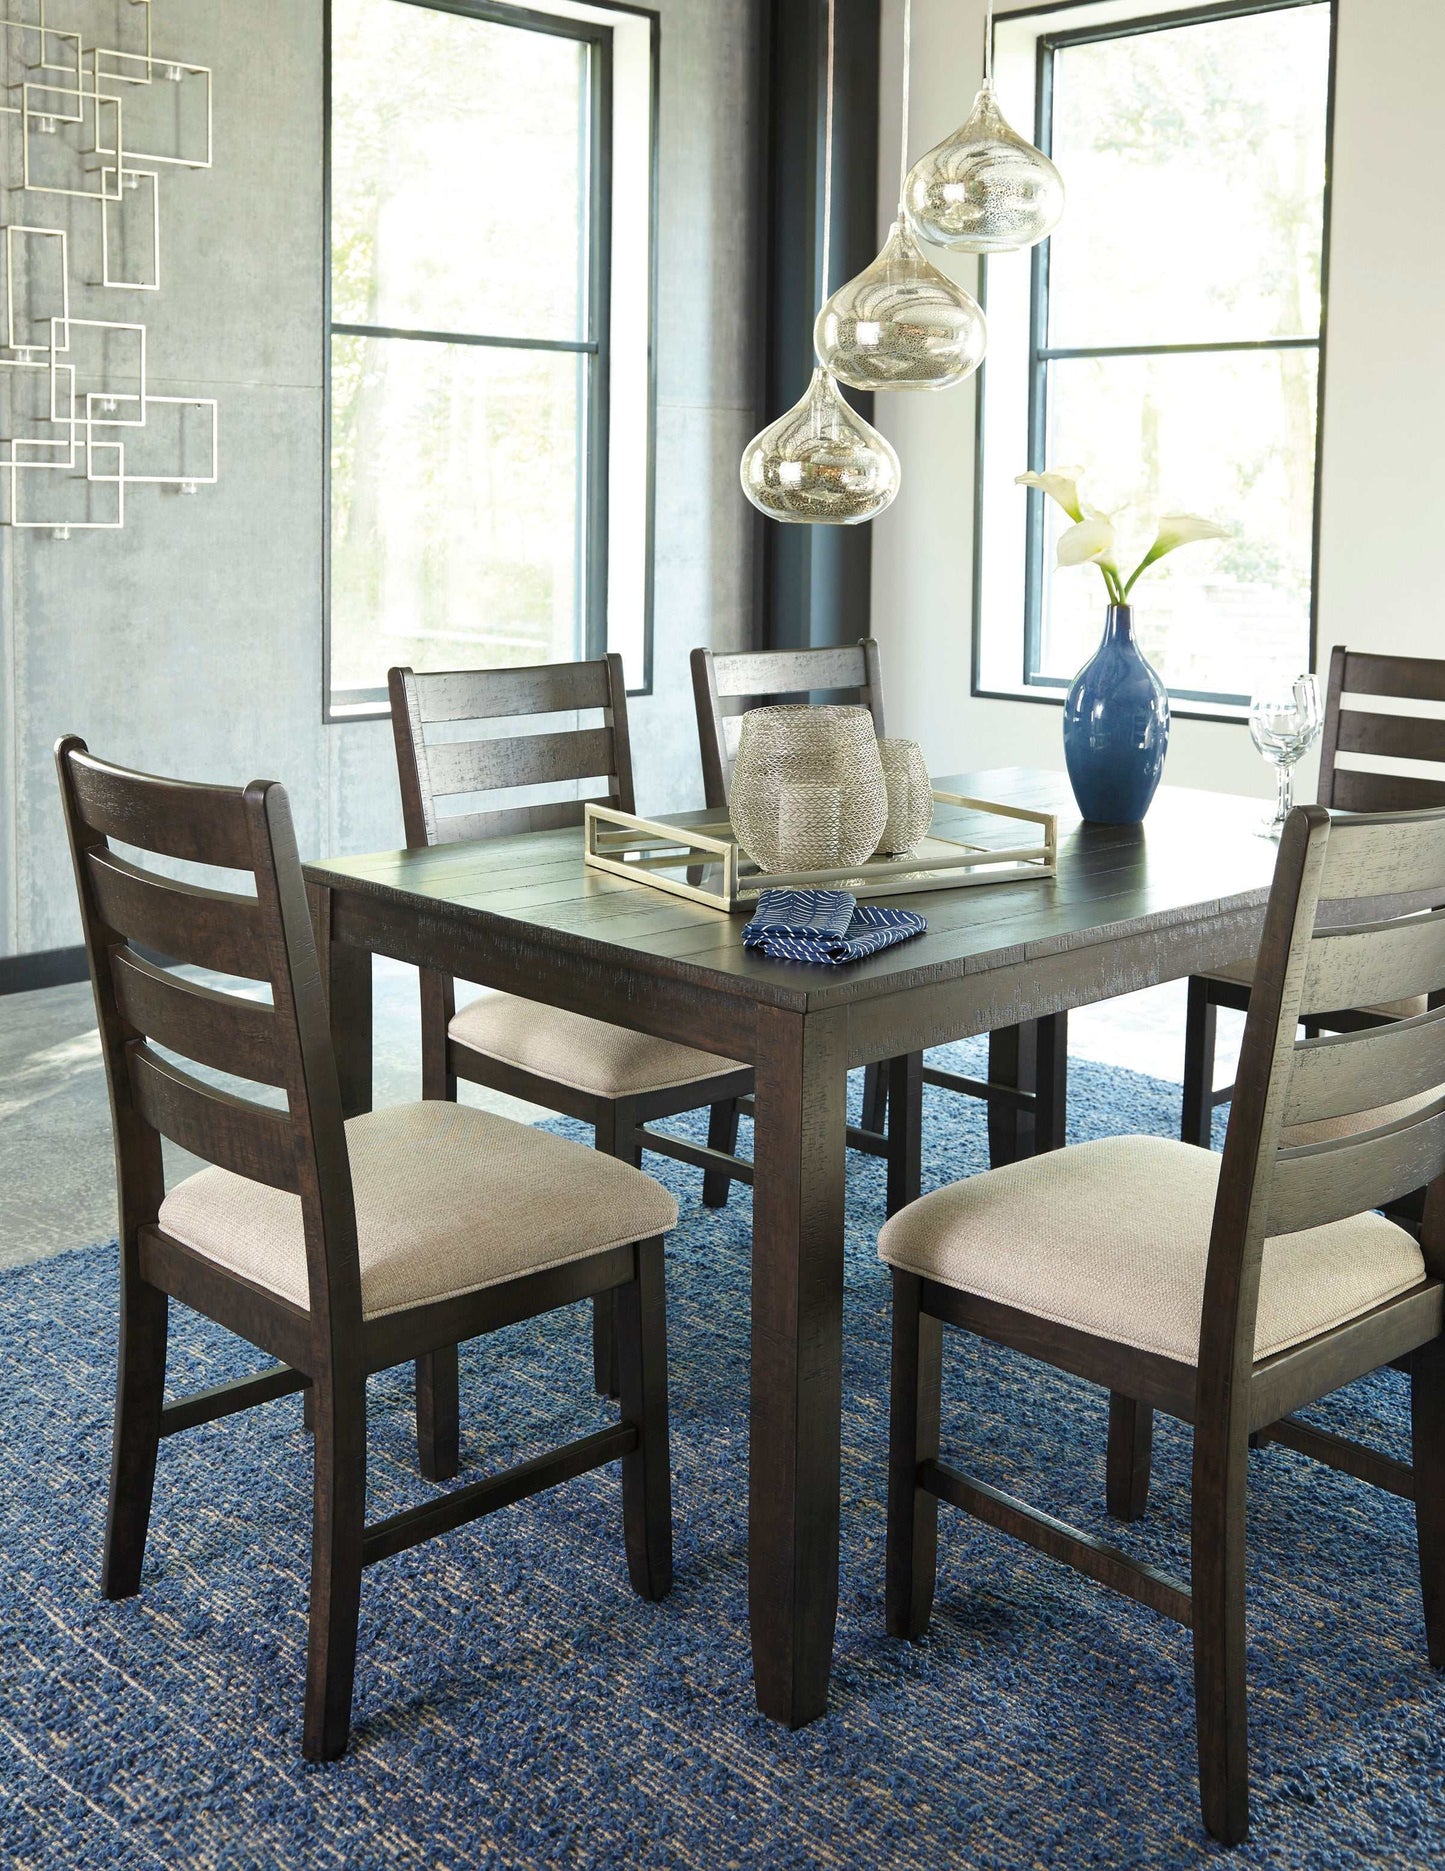 Rokane Brown Dining Room Table & Chairs (Set of 7)